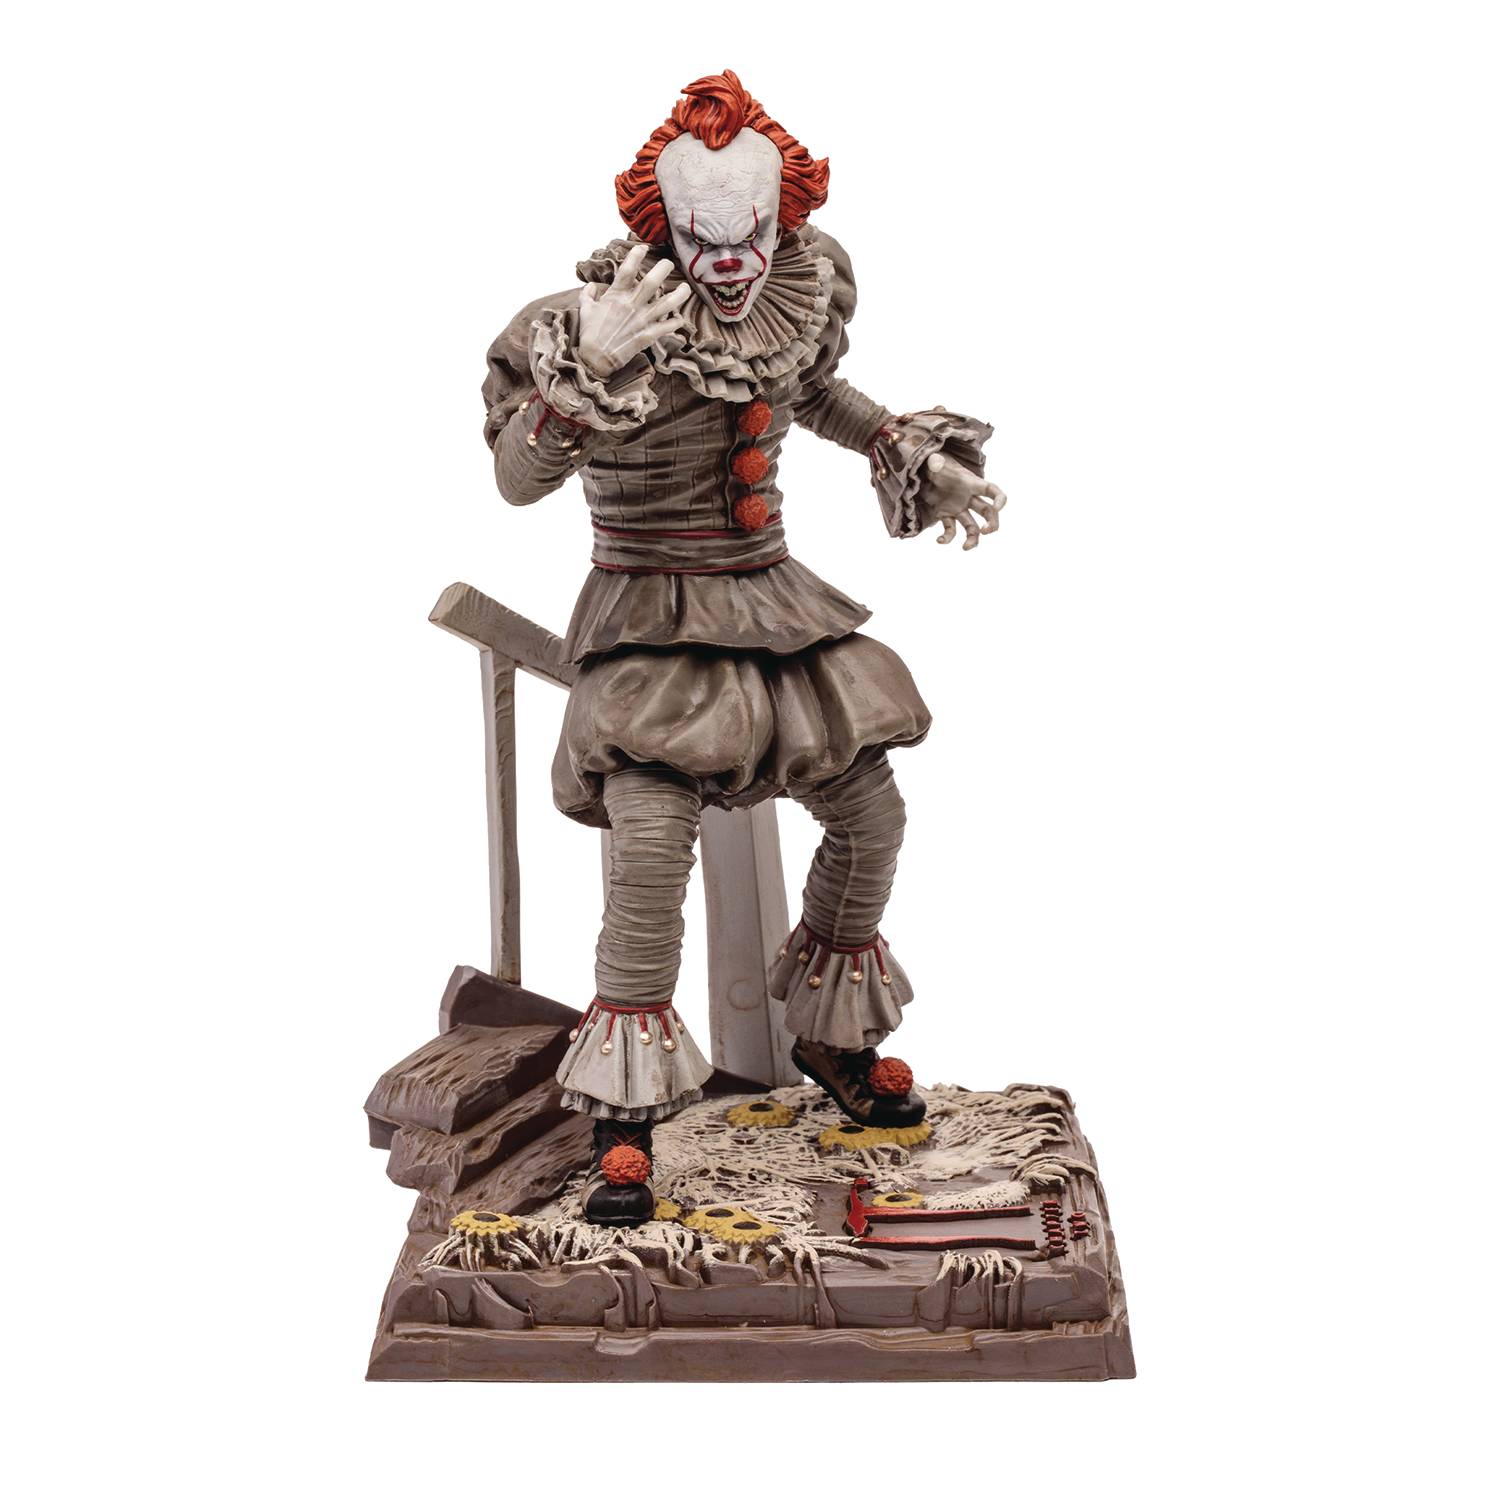 MOVIE MANIACS WB100 6IN IT2 PENNYWISE FIGURE